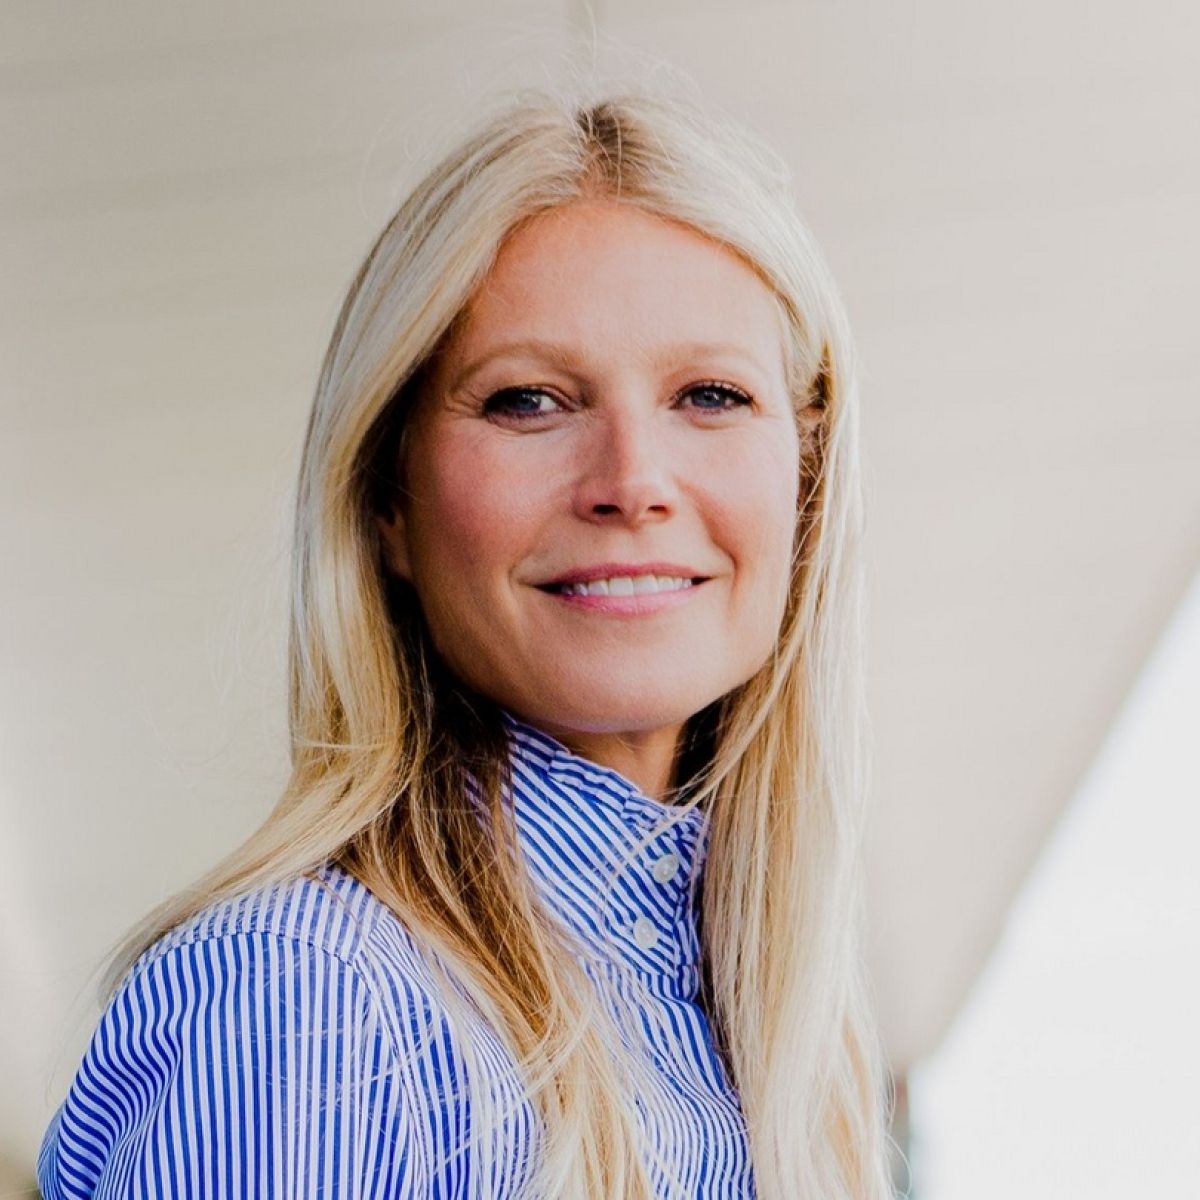 Hd Porn Gwyneth Paltrow - Gwyneth Paltrow: 'I've never been asked that question before. You've made  me blush'